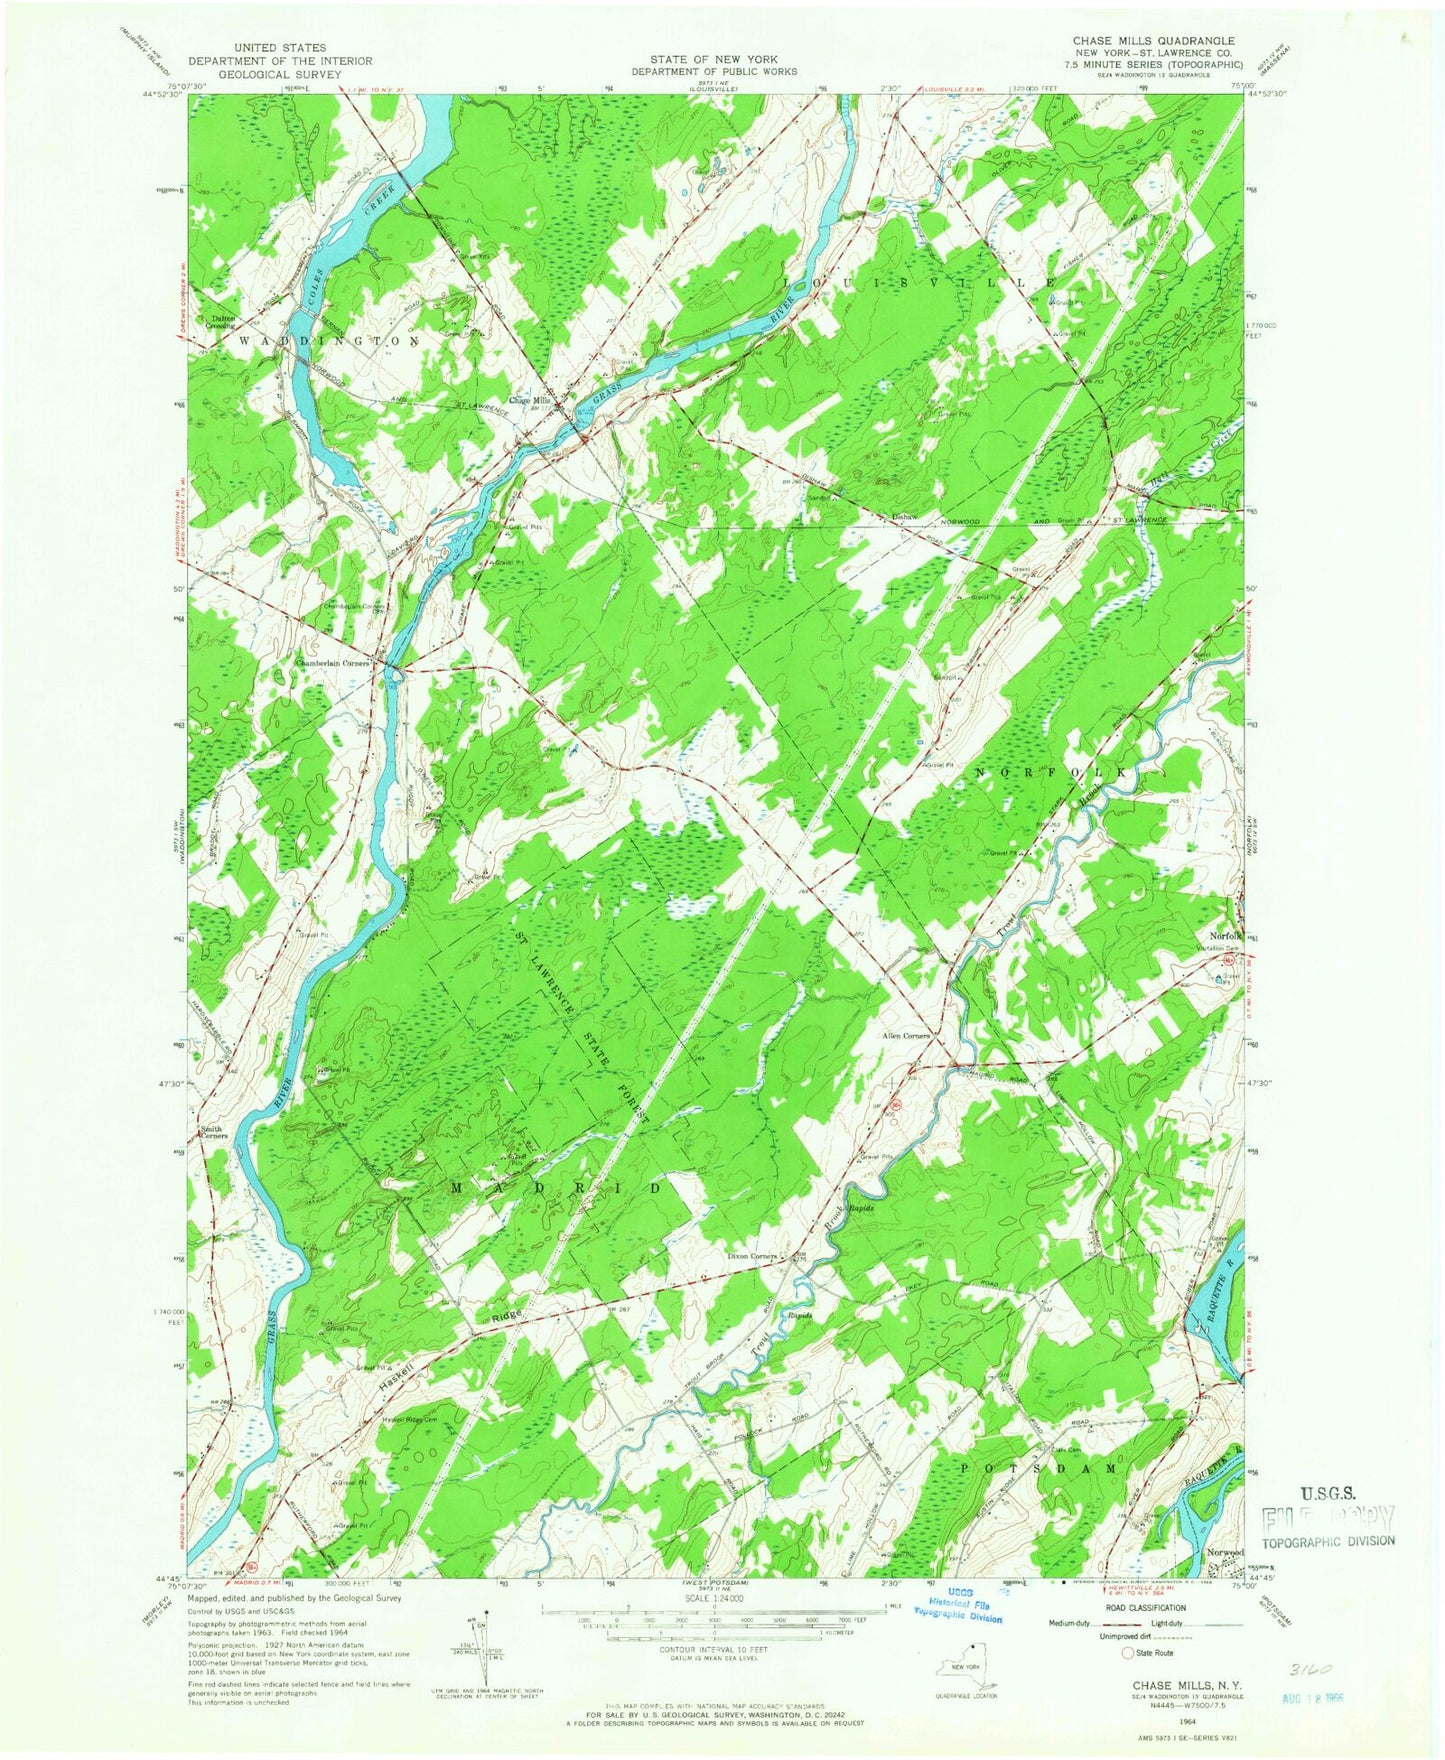 Classic USGS Chase Mills New York 7.5'x7.5' Topo Map Image